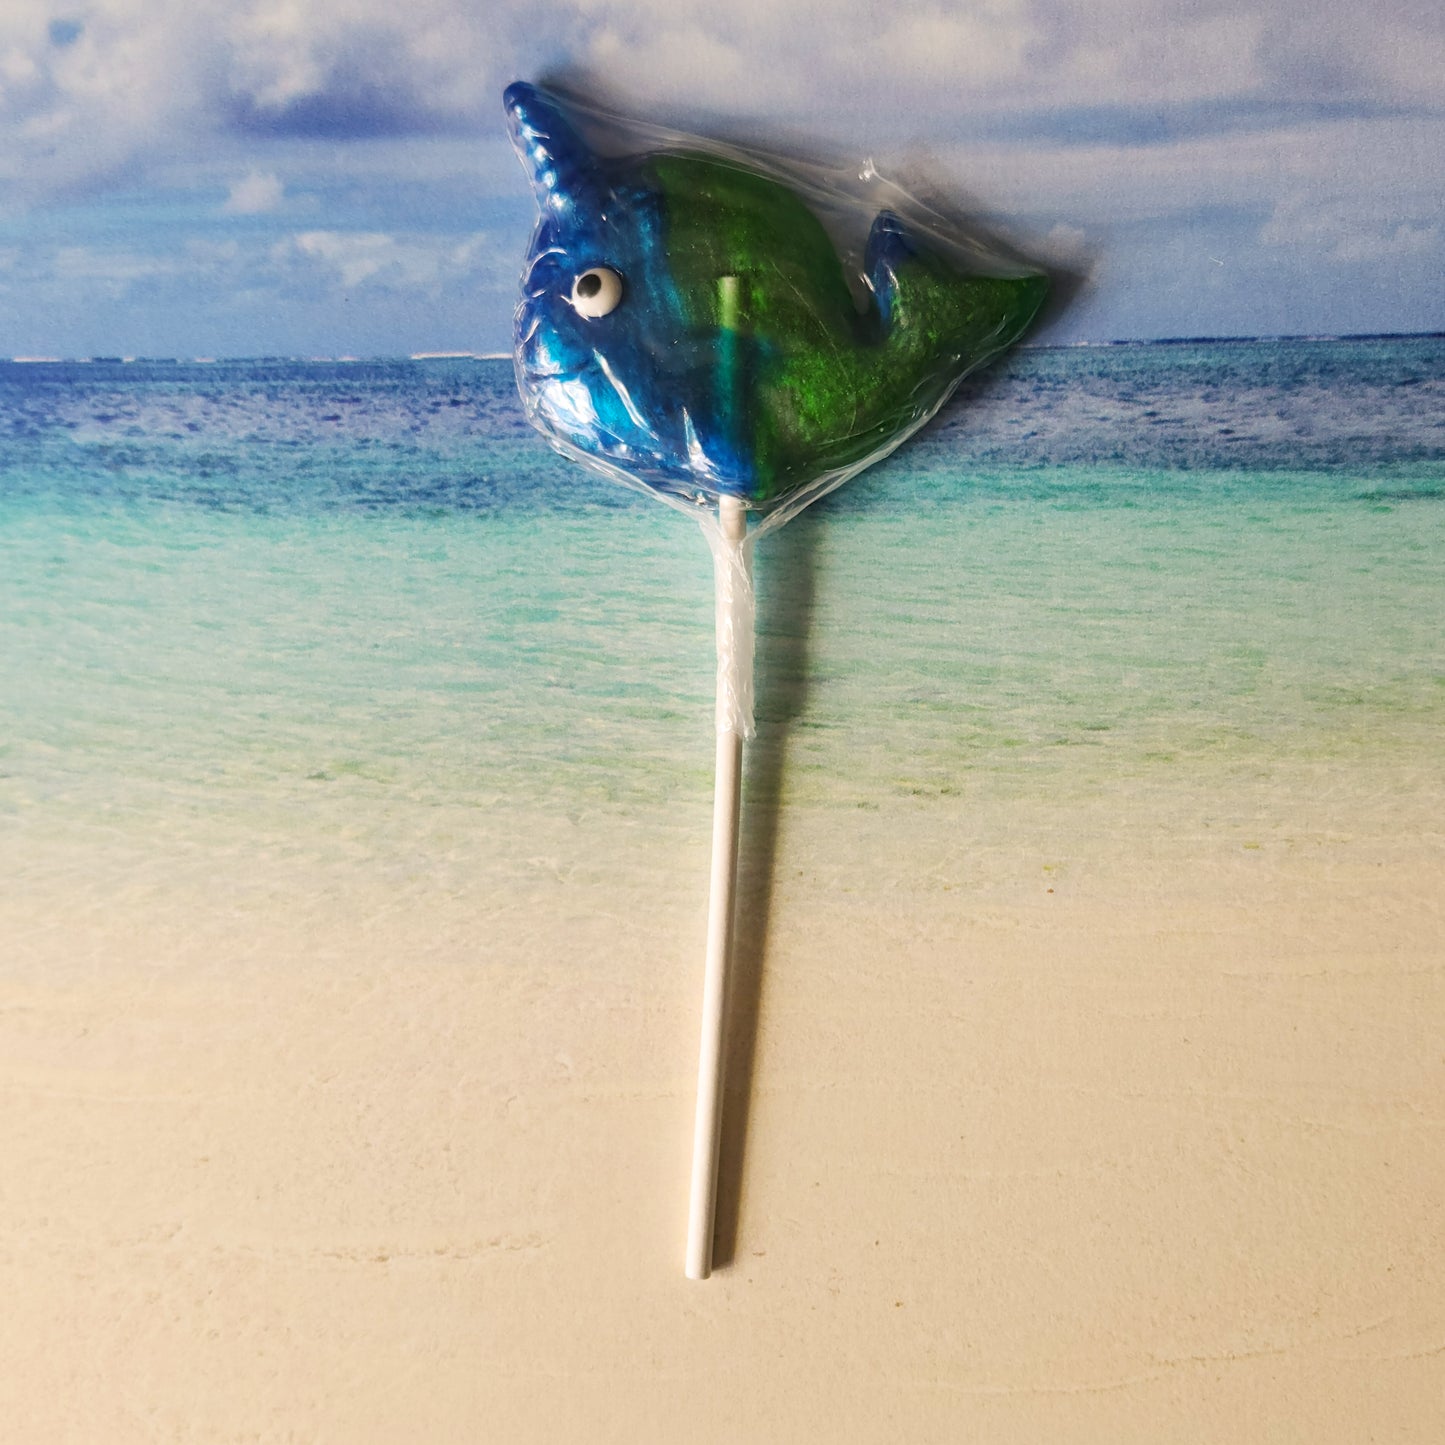 Refreshing fruit punch is the flavor of this fun narwhal shaped hard candy lollipop.